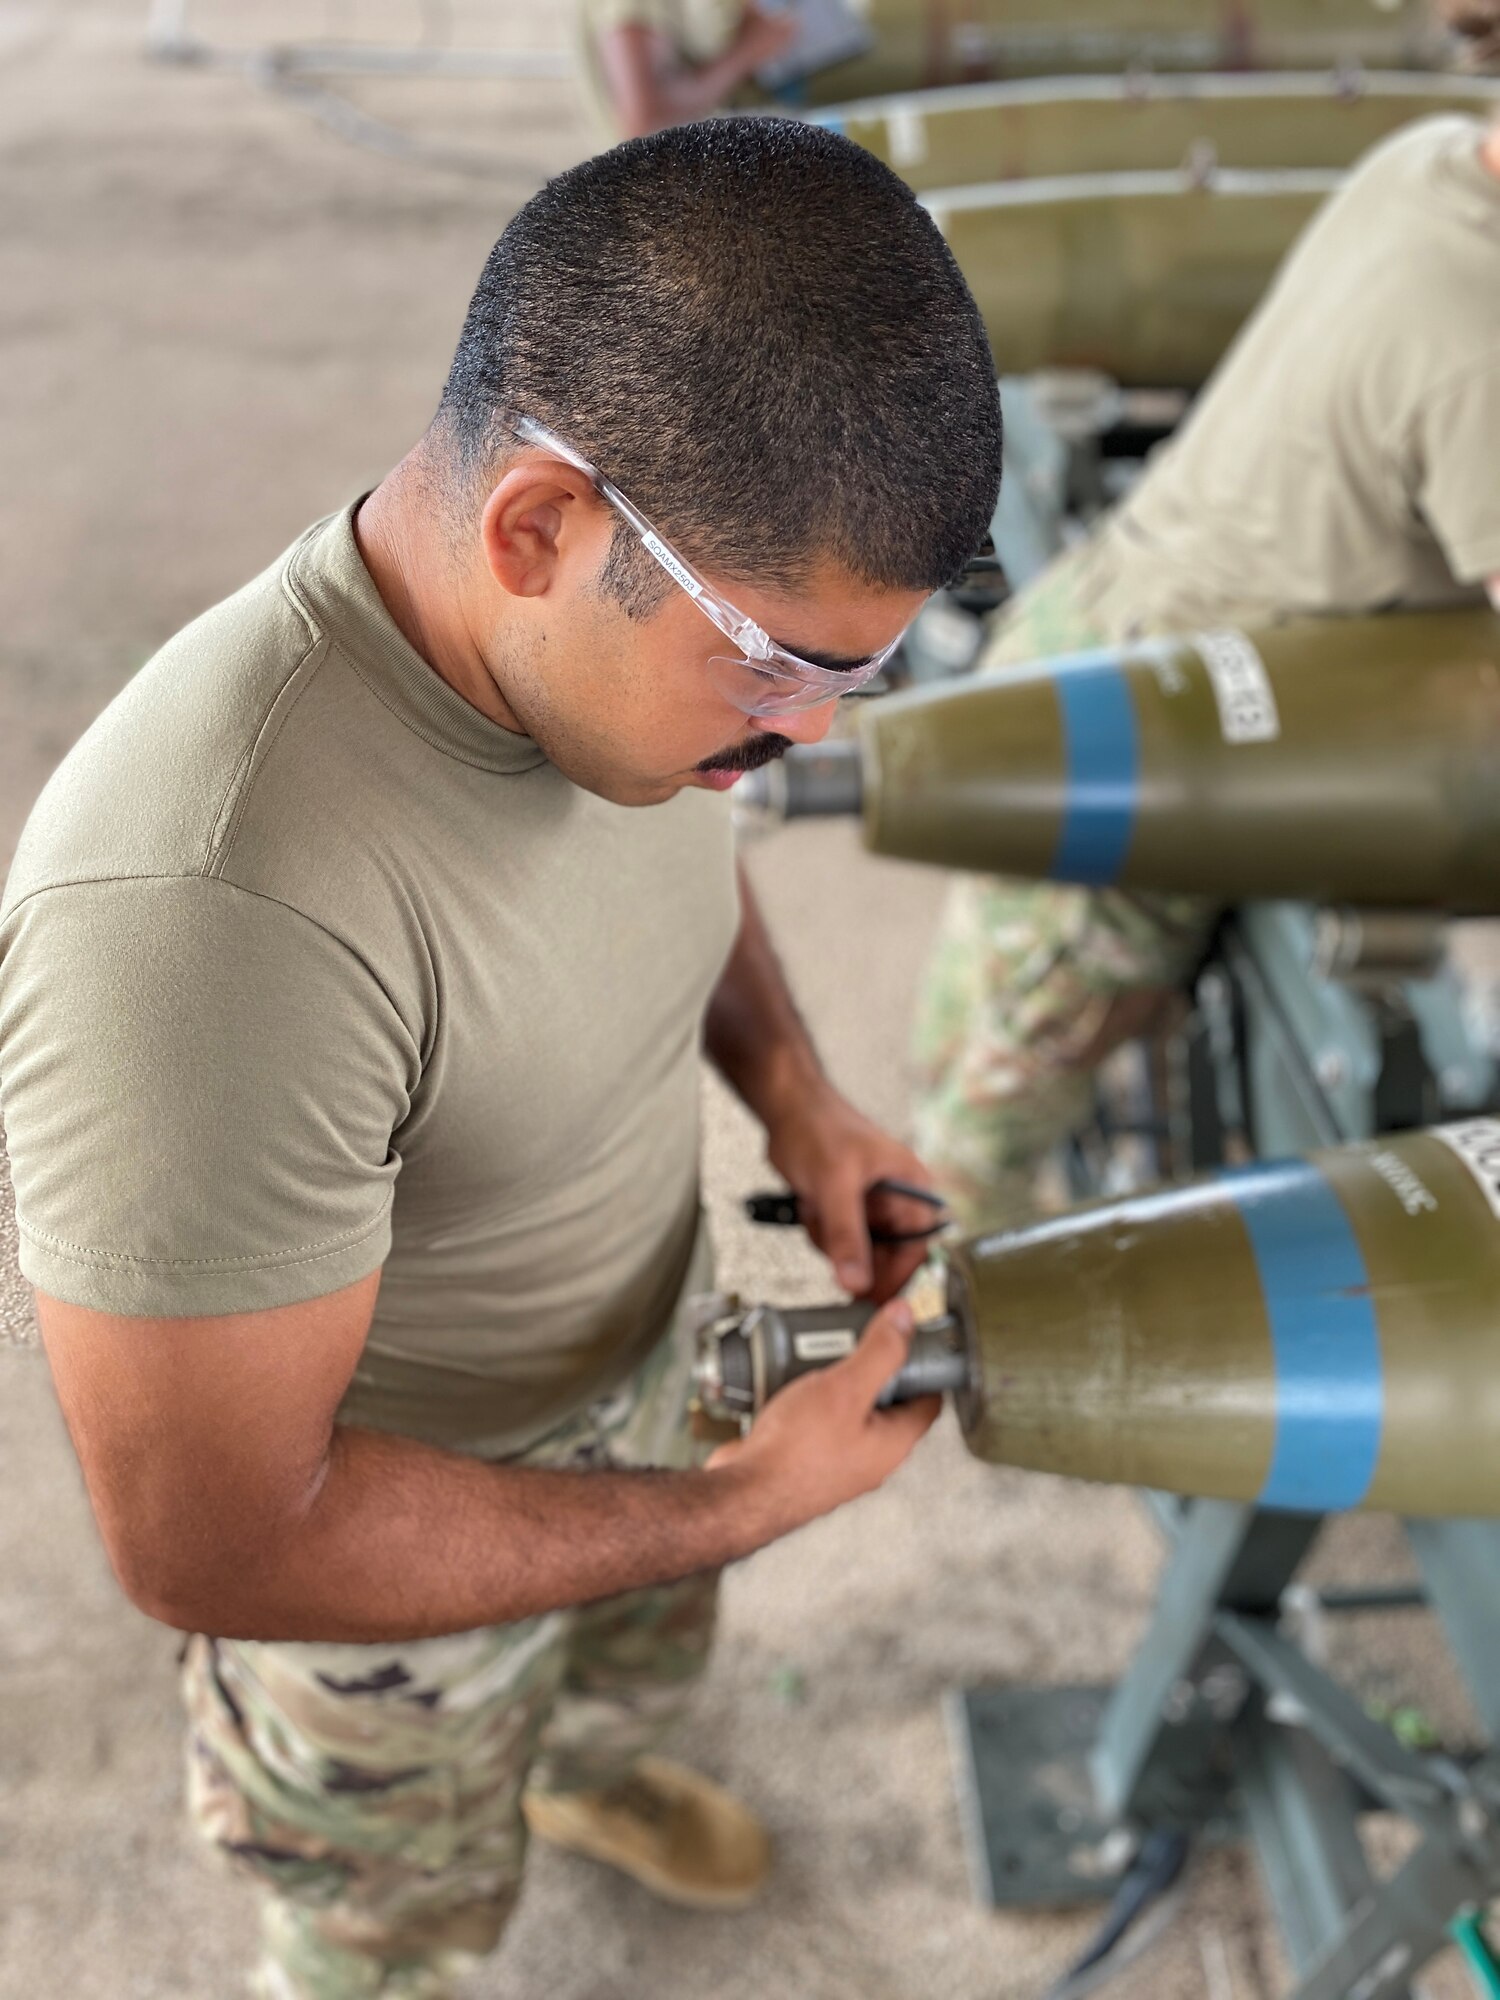 Airman 1st Class Jan Pabon, 363rd Training Squadron munitions system apprentice course student, assembles an MK82 training bomb at Sheppard Air Force Base, Texas, July 17, 2020. Pabon ACEd the munitions system apprentice course after scoring perfect scores on all seven of the course's block tests. (Courtesy Photo)